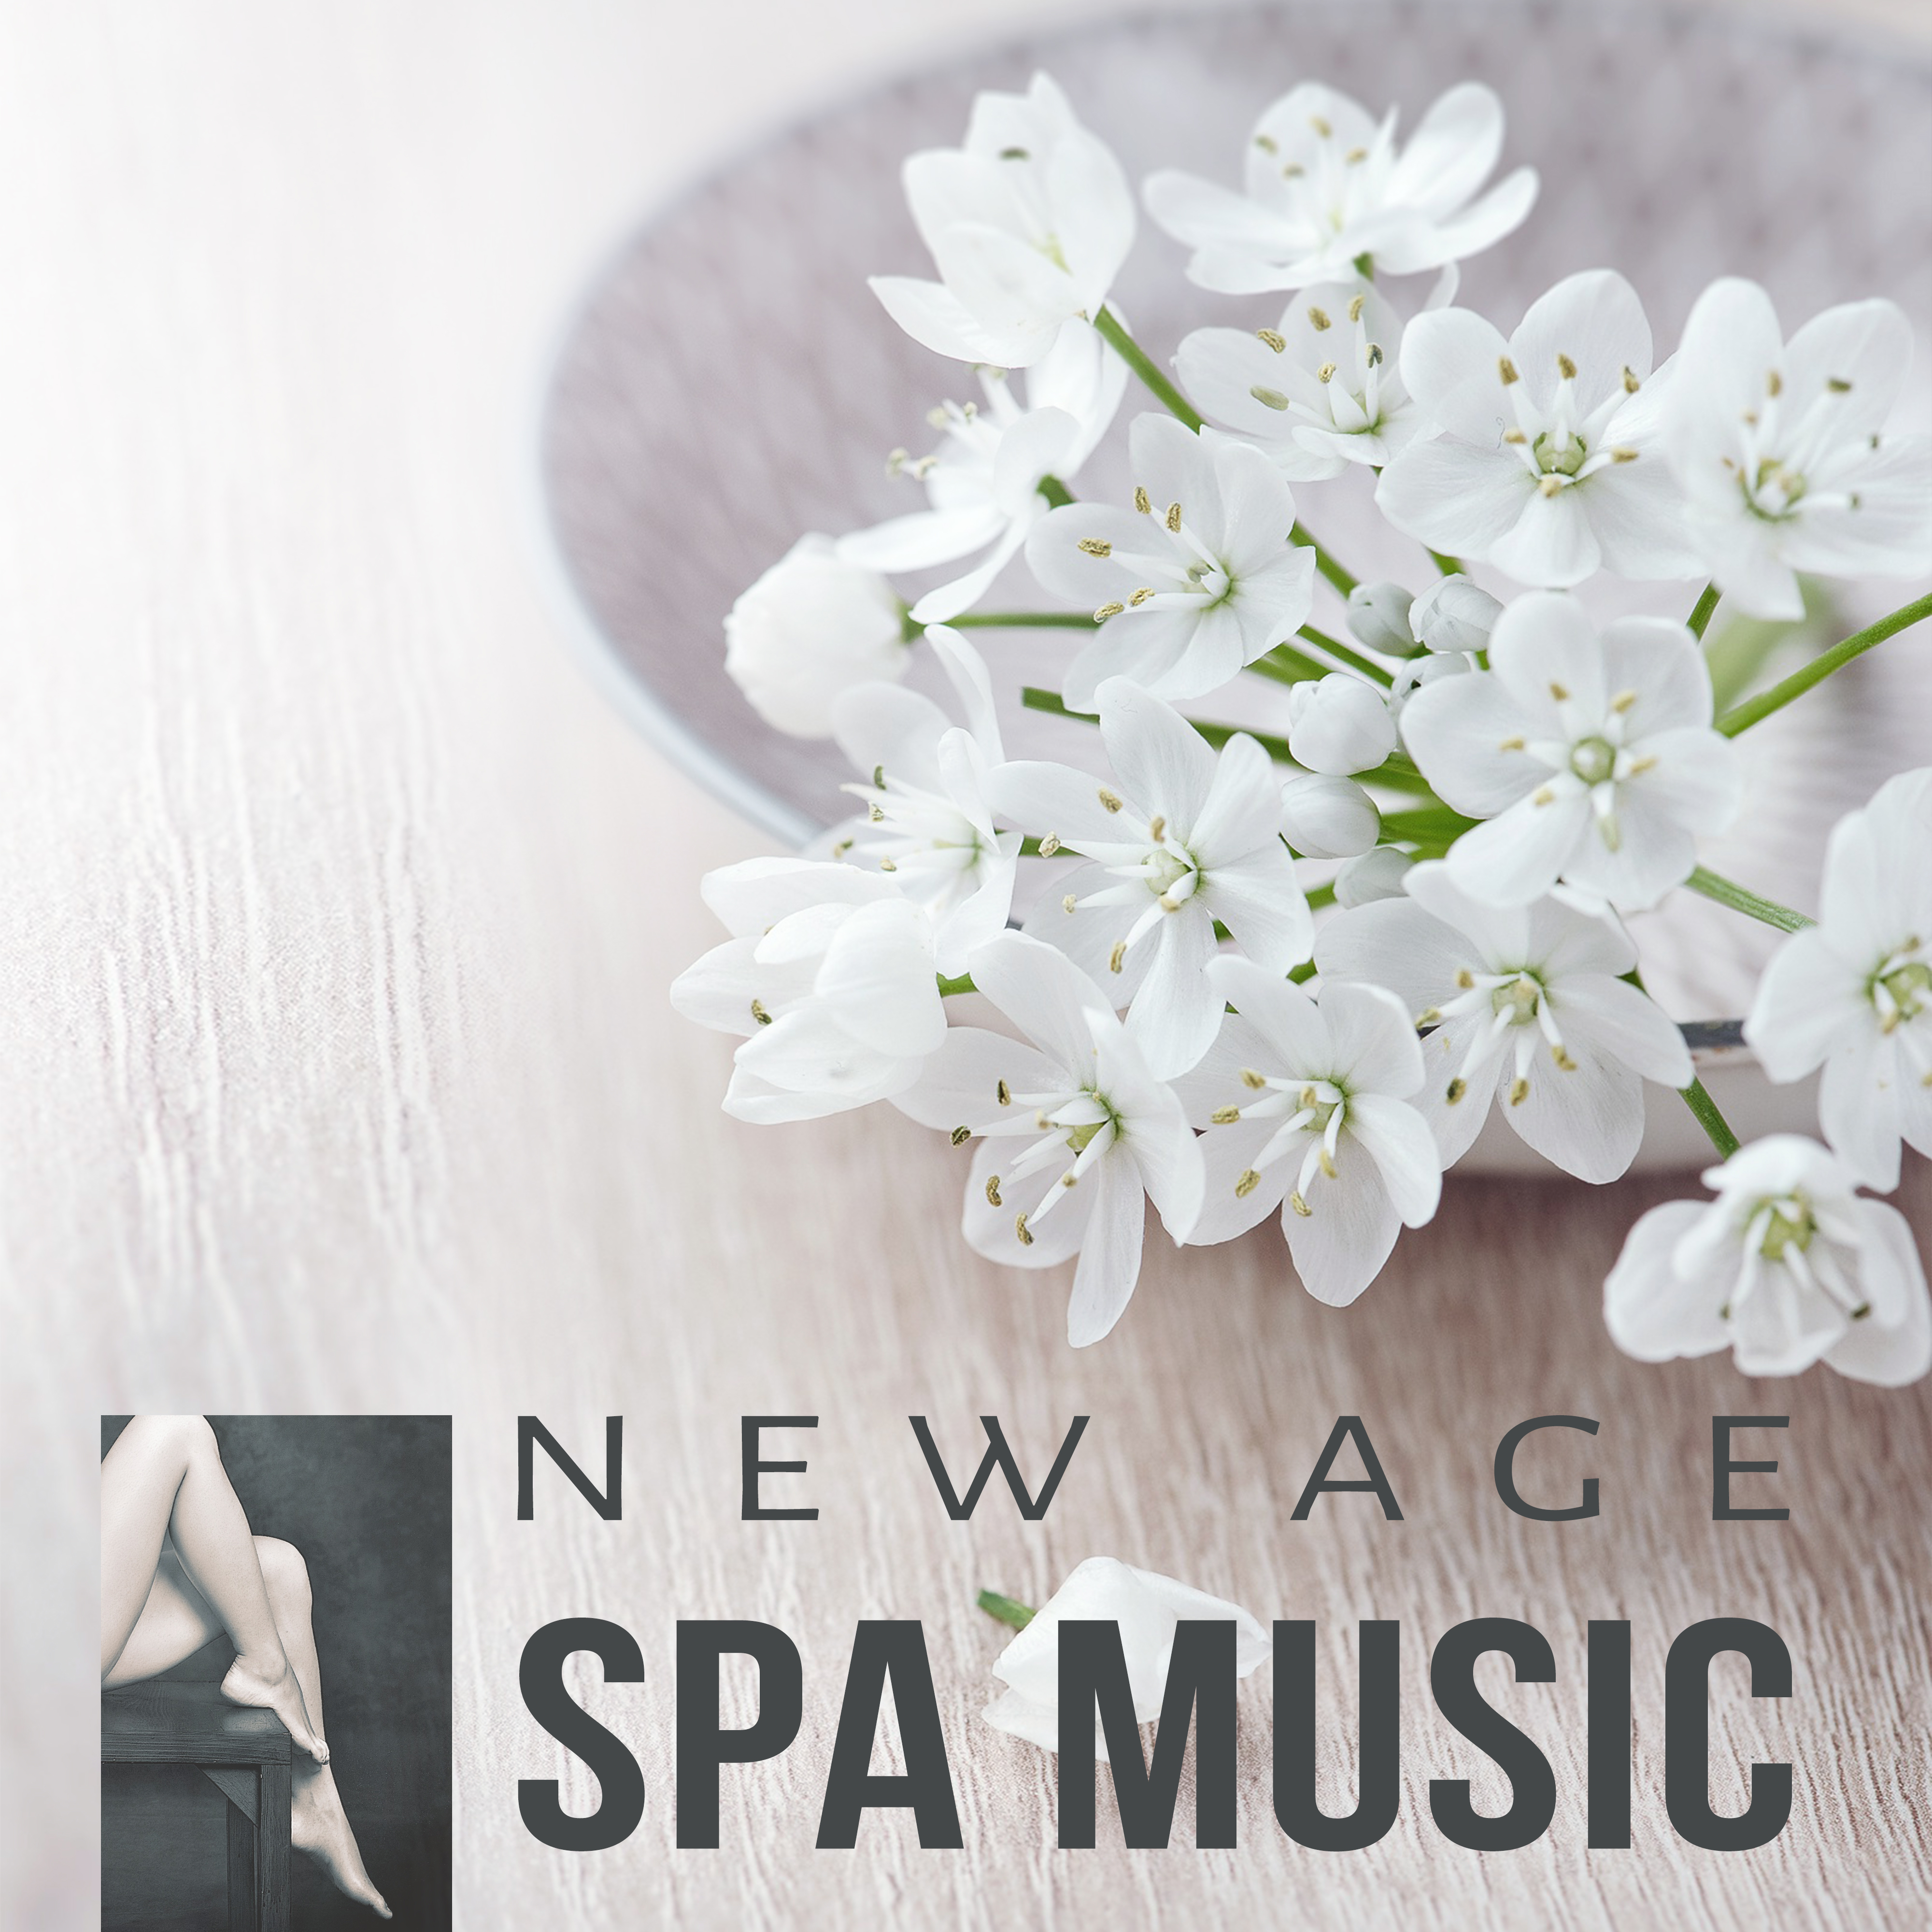 New Age Spa Music  Spa Relaxation, Soothing Birds Sounds, Chill Yourself in Spa